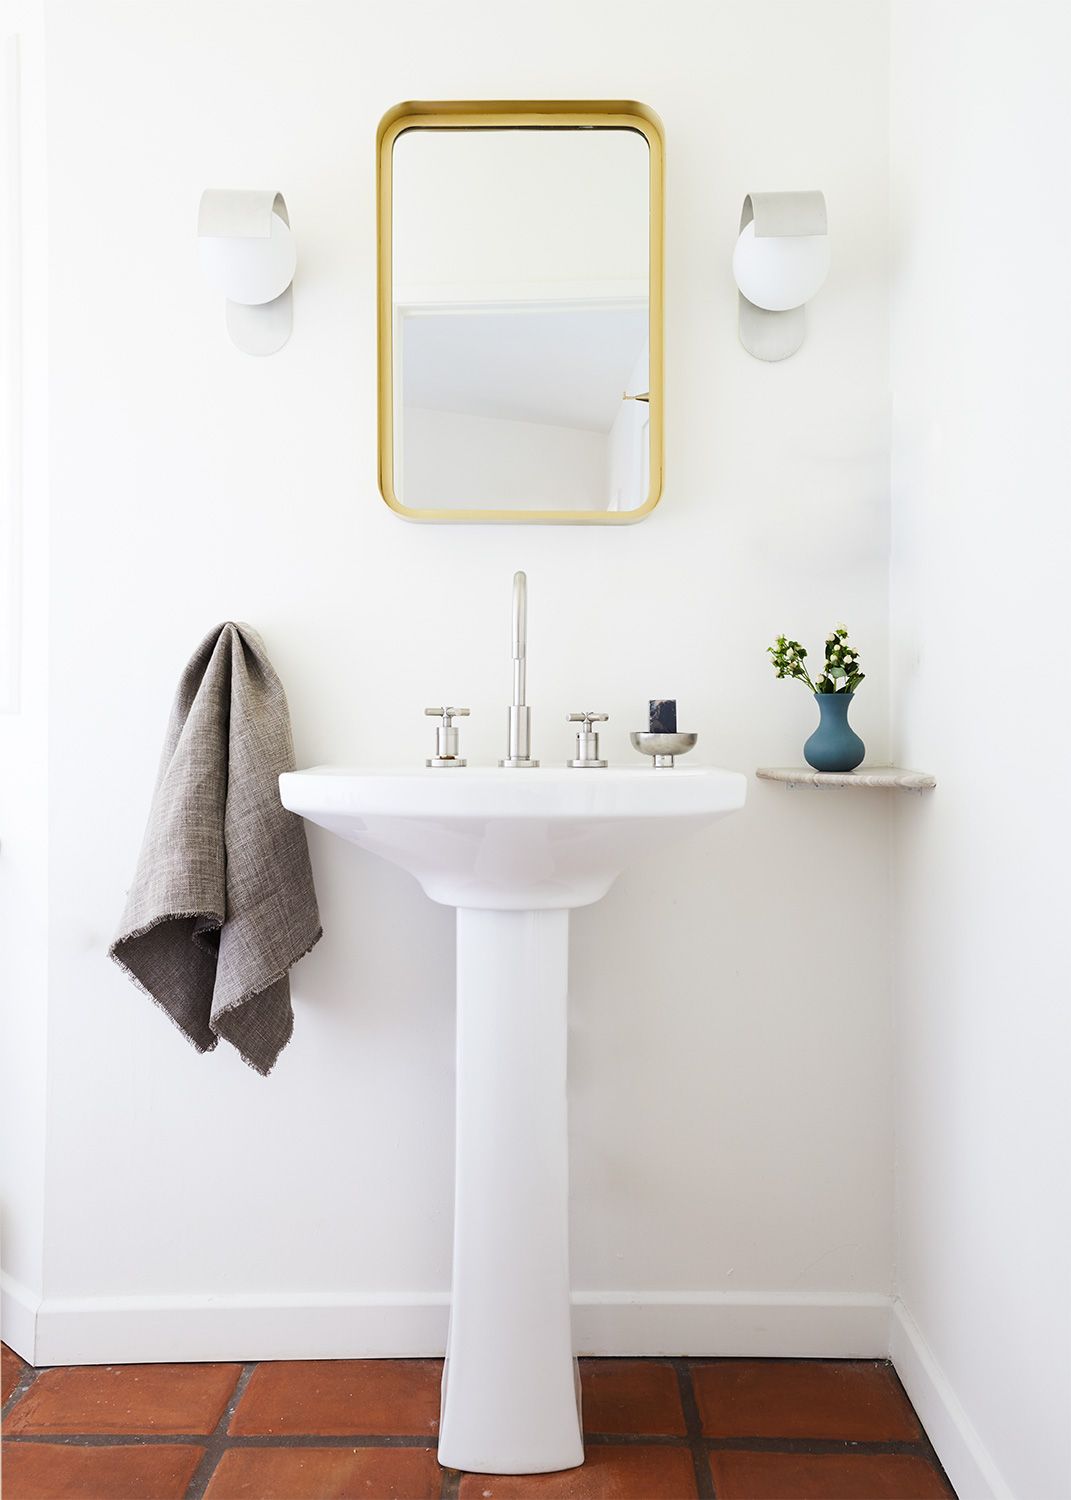 Tips to make a small bathroom more open and spacious - Photo 8.